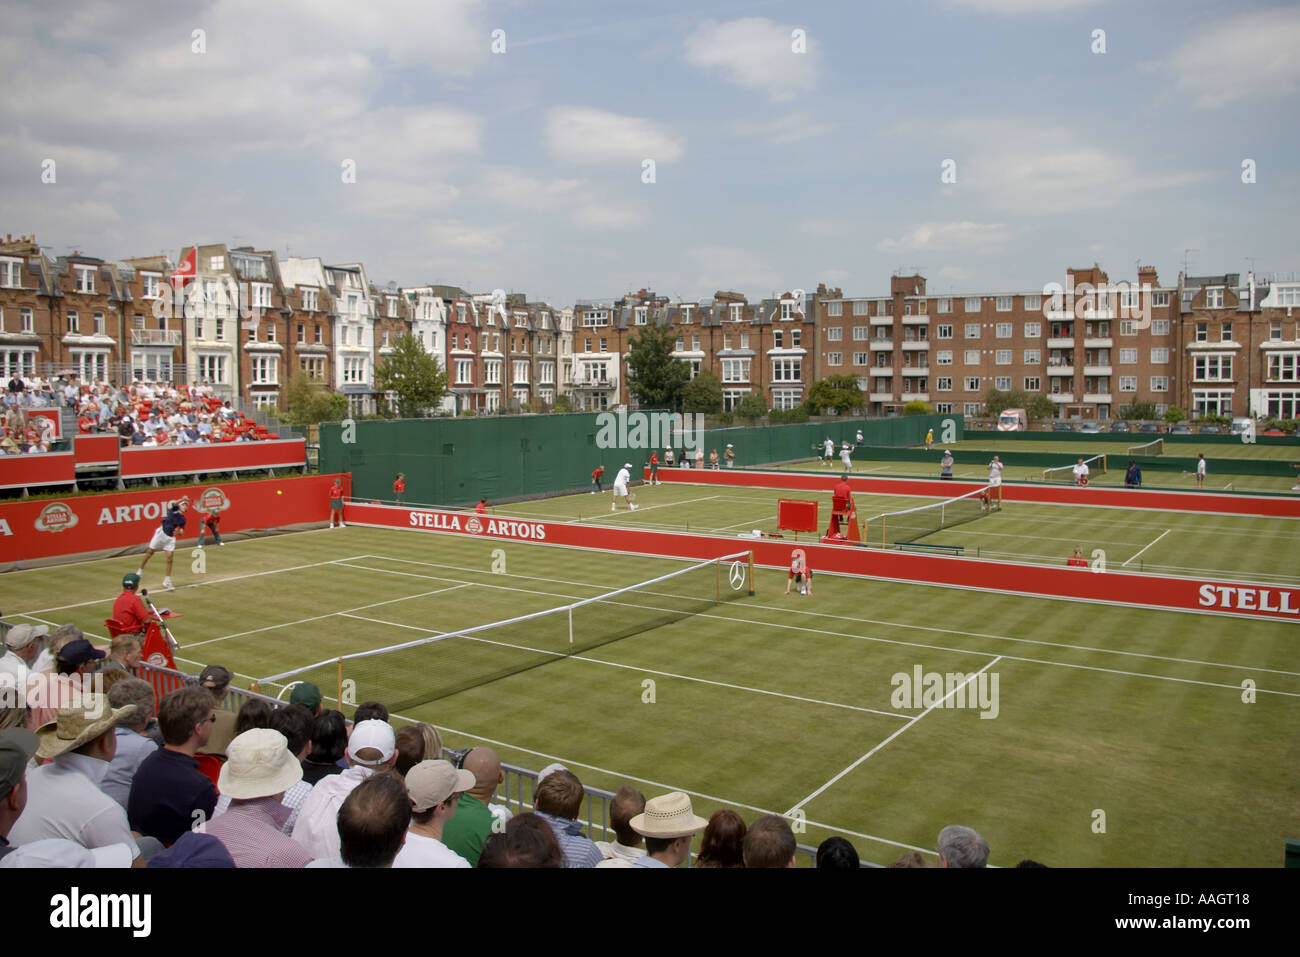 Stella Artois Queens Club tennis tournament courts and grounds Stock Photo  - Alamy